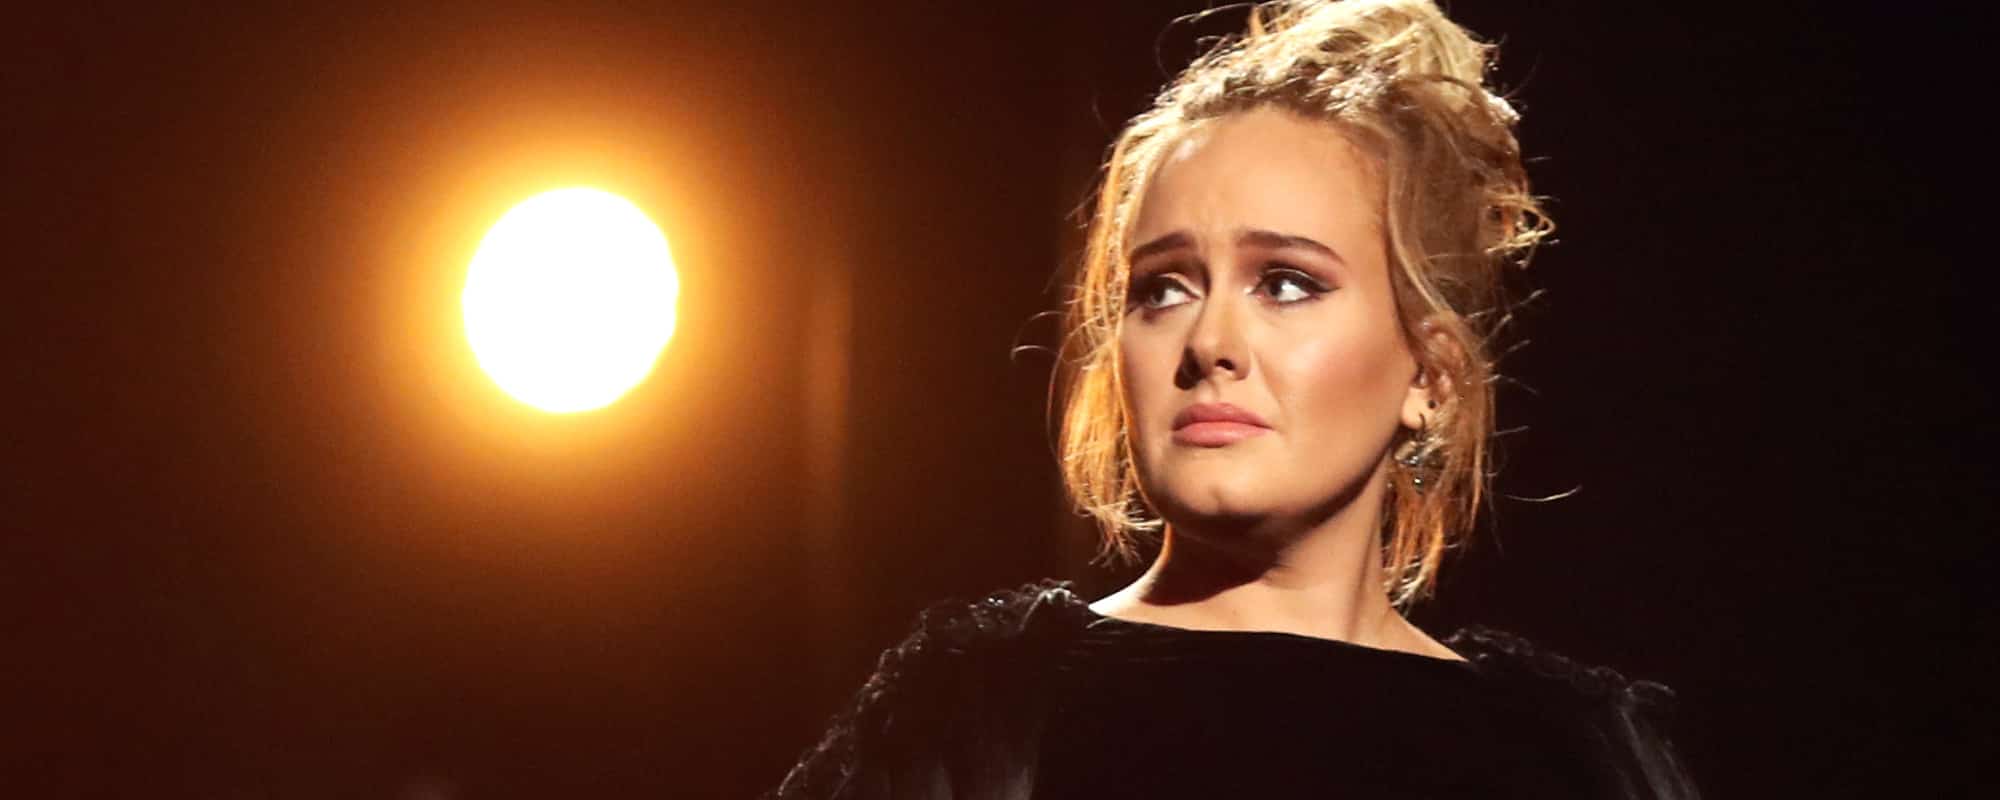 The Story Behind the Song: Adele, “Someone Like You”